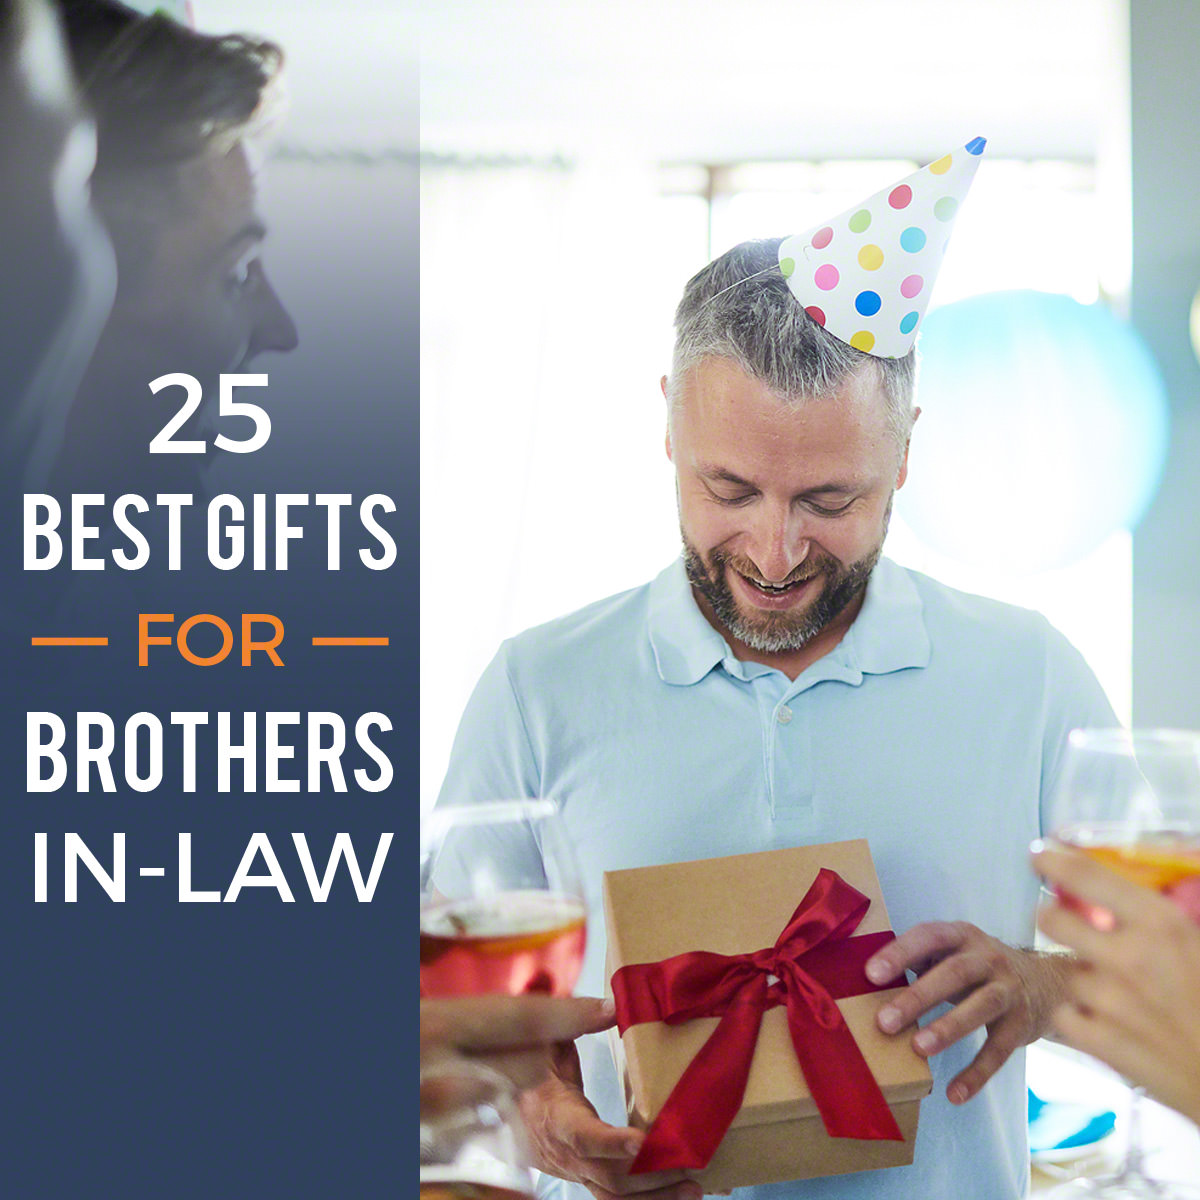 42 Best Gifts for Brothers — Find Gift Ideas for Every Occasion - Reviewed